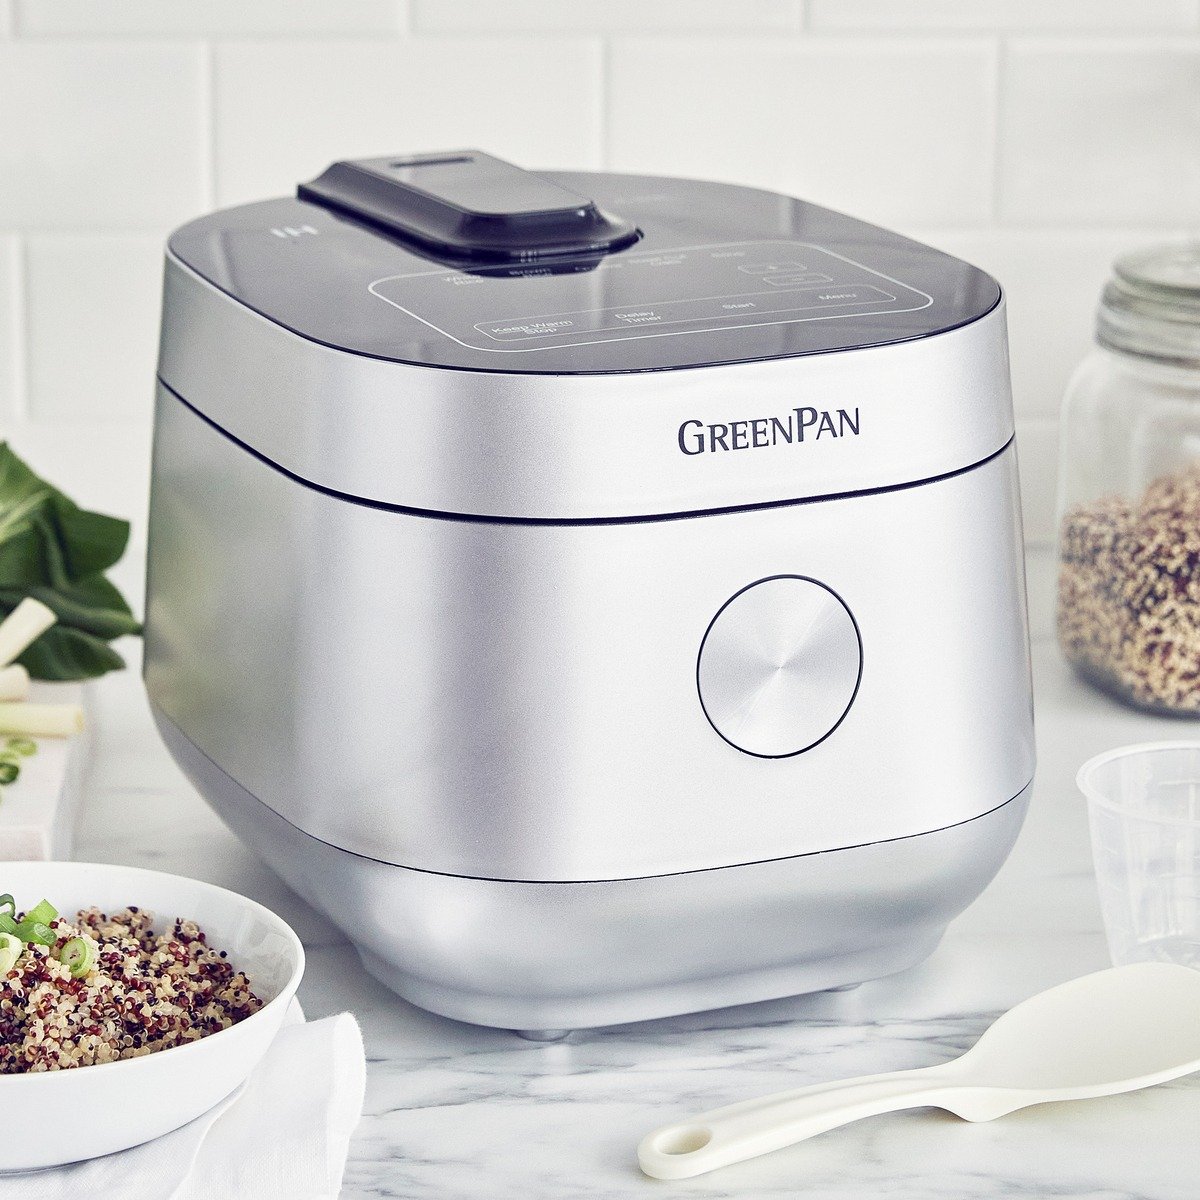  - Shop by Category - Rice Cookers